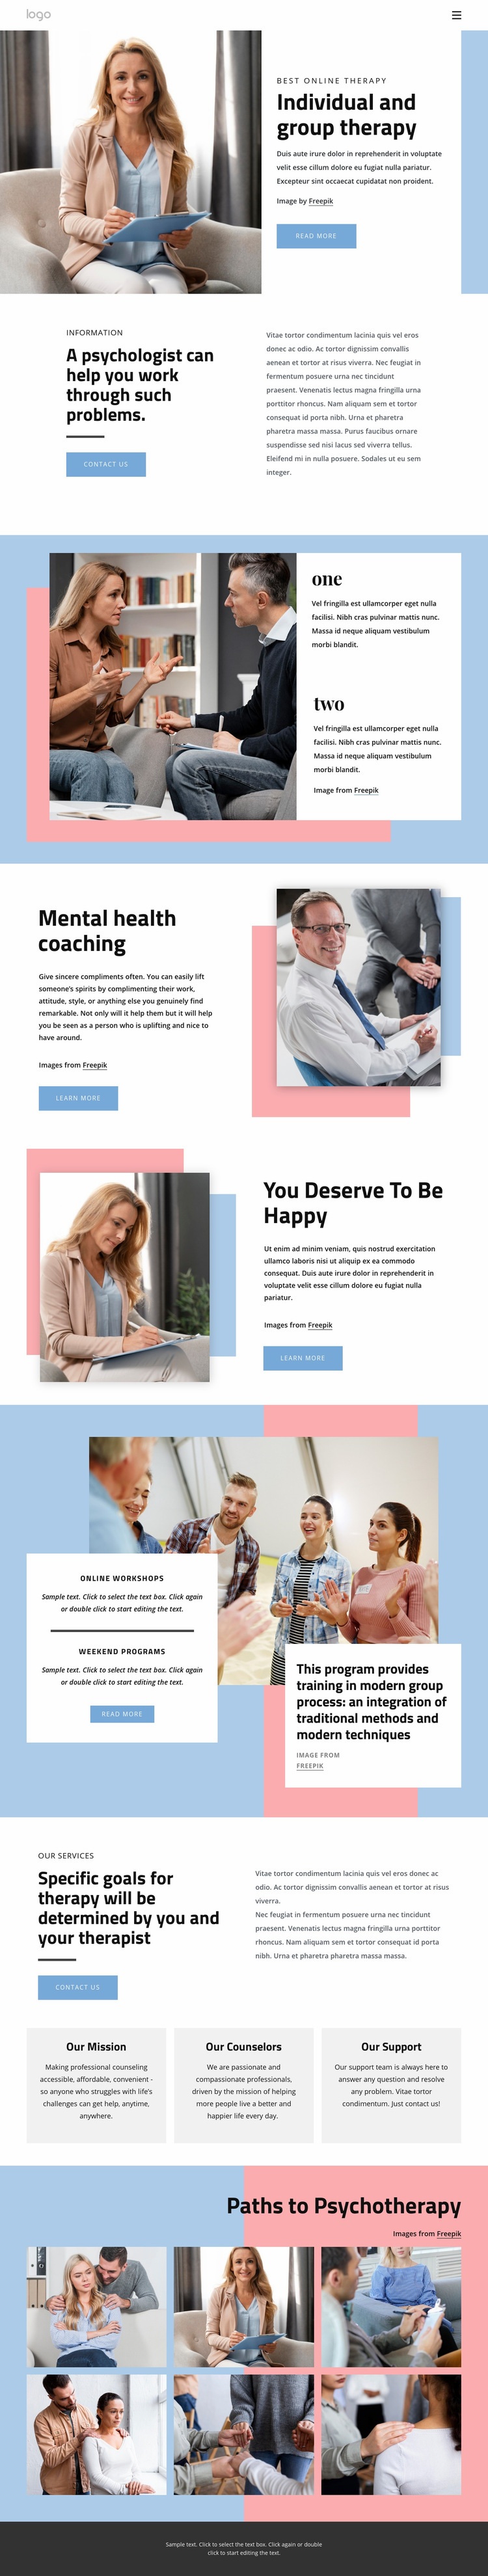 Undividual and group therapy Web Page Designer